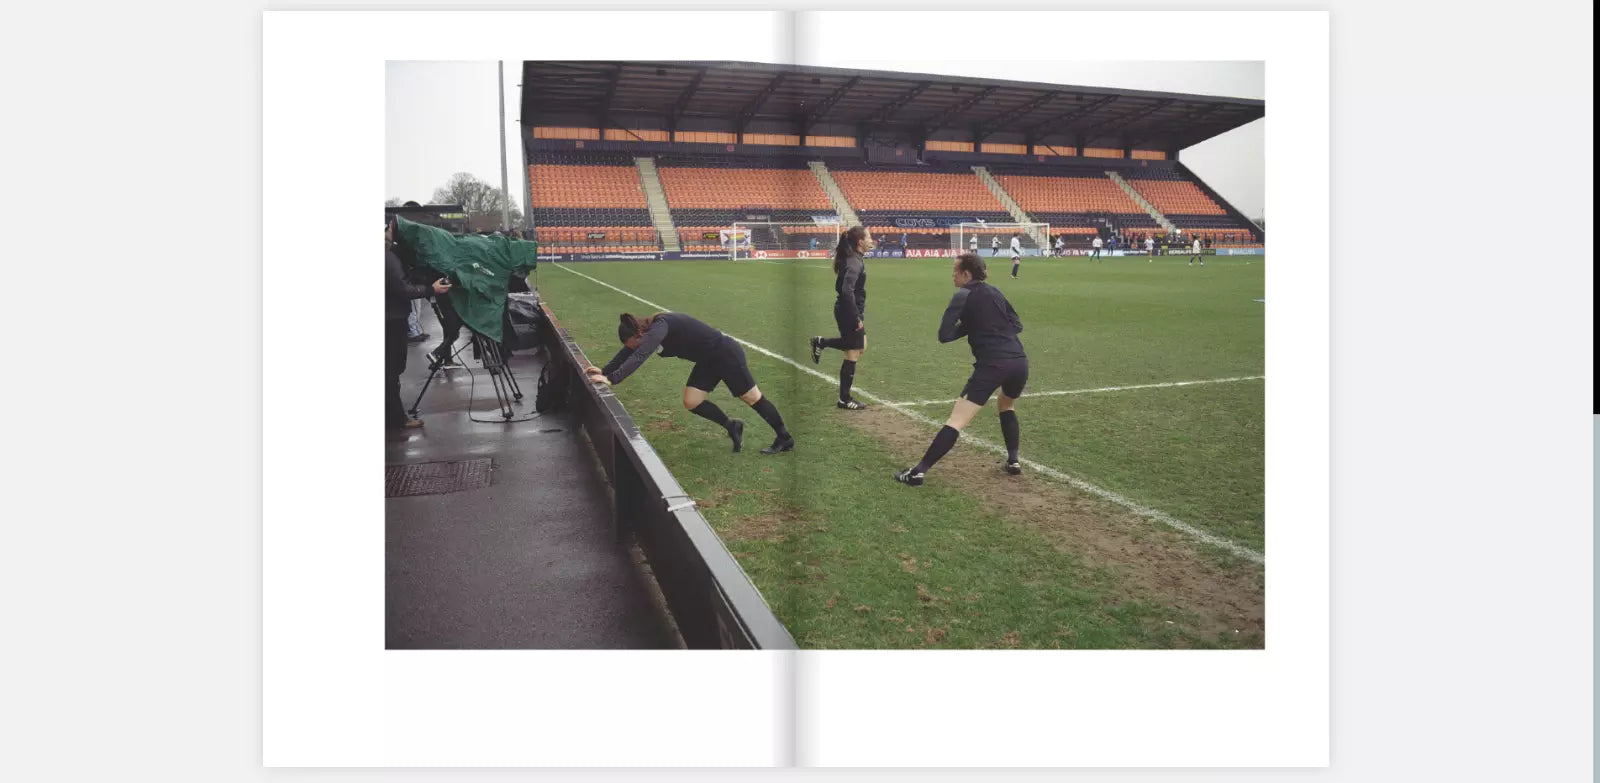 Two-page spread from the zine "The Women's Game" by Claire Wray. The image shows three female football players in black training gear stretching and warming up on the sideline of a football field. In the background, there is a nearly empty stadium with orange and black seats. On the left side of the image, a camera crew is filming, with one cameraman adjusting the equipment under a green cover. The scene appears to be during a practice or pre-match preparation.